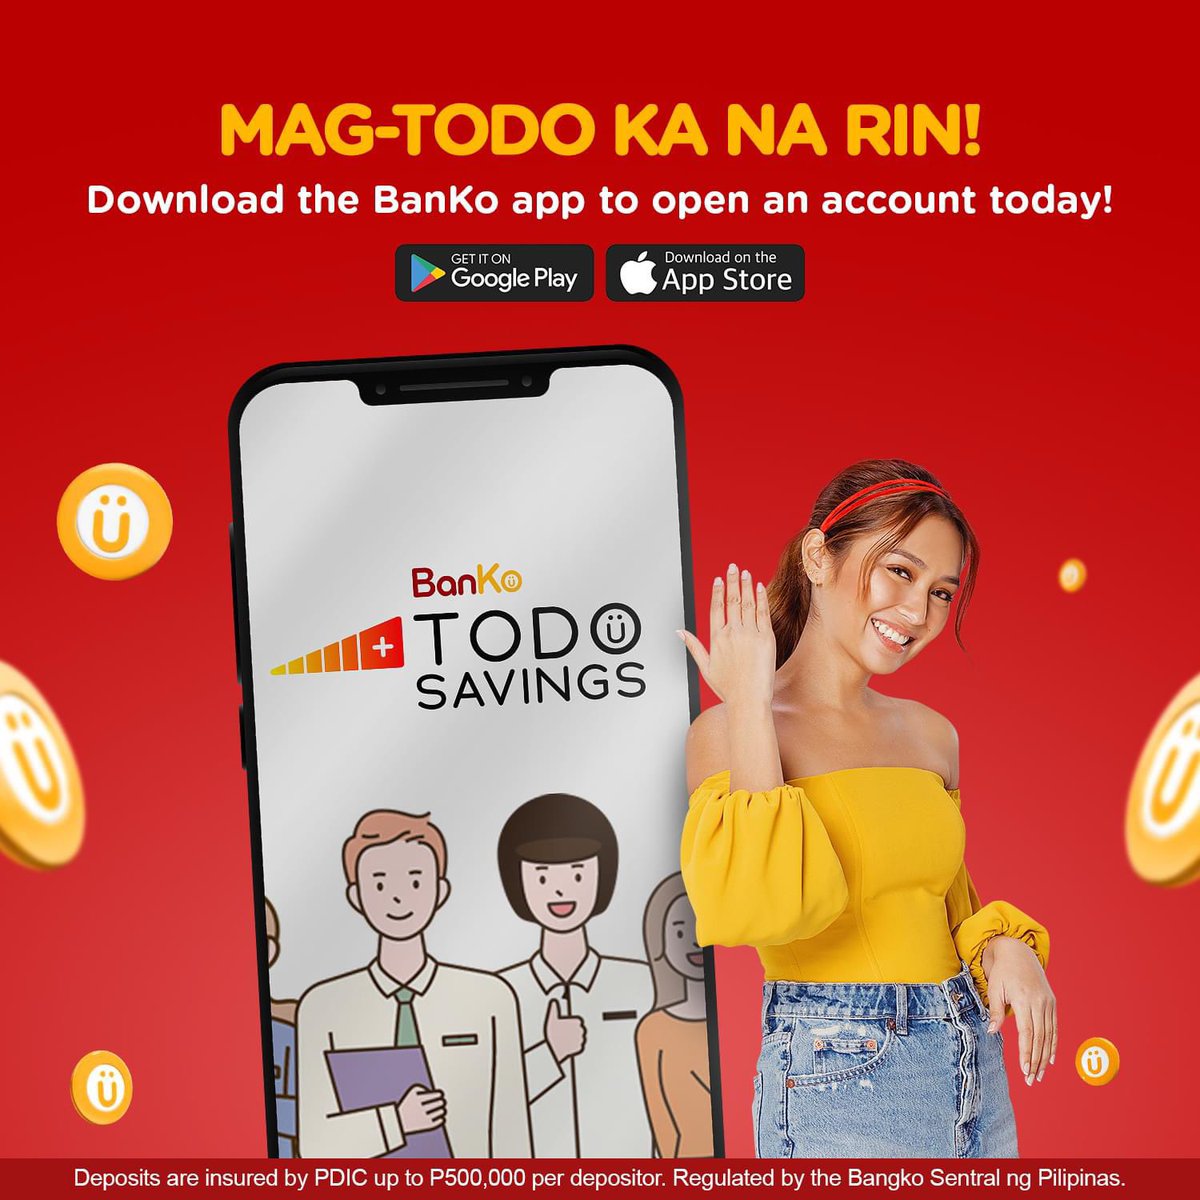 Bakit ko ginusto mag-TODO? Swipe to find out! Ikaw naman, mag- TODO ka na rin! Download the BanKo app to open a TODO Savings Account today. BanKo is regulated by the Banko Sentral ng Pilipinas. bsp.gov.ph Deposits are insured by PDIC up to P500,000 per depositor.…